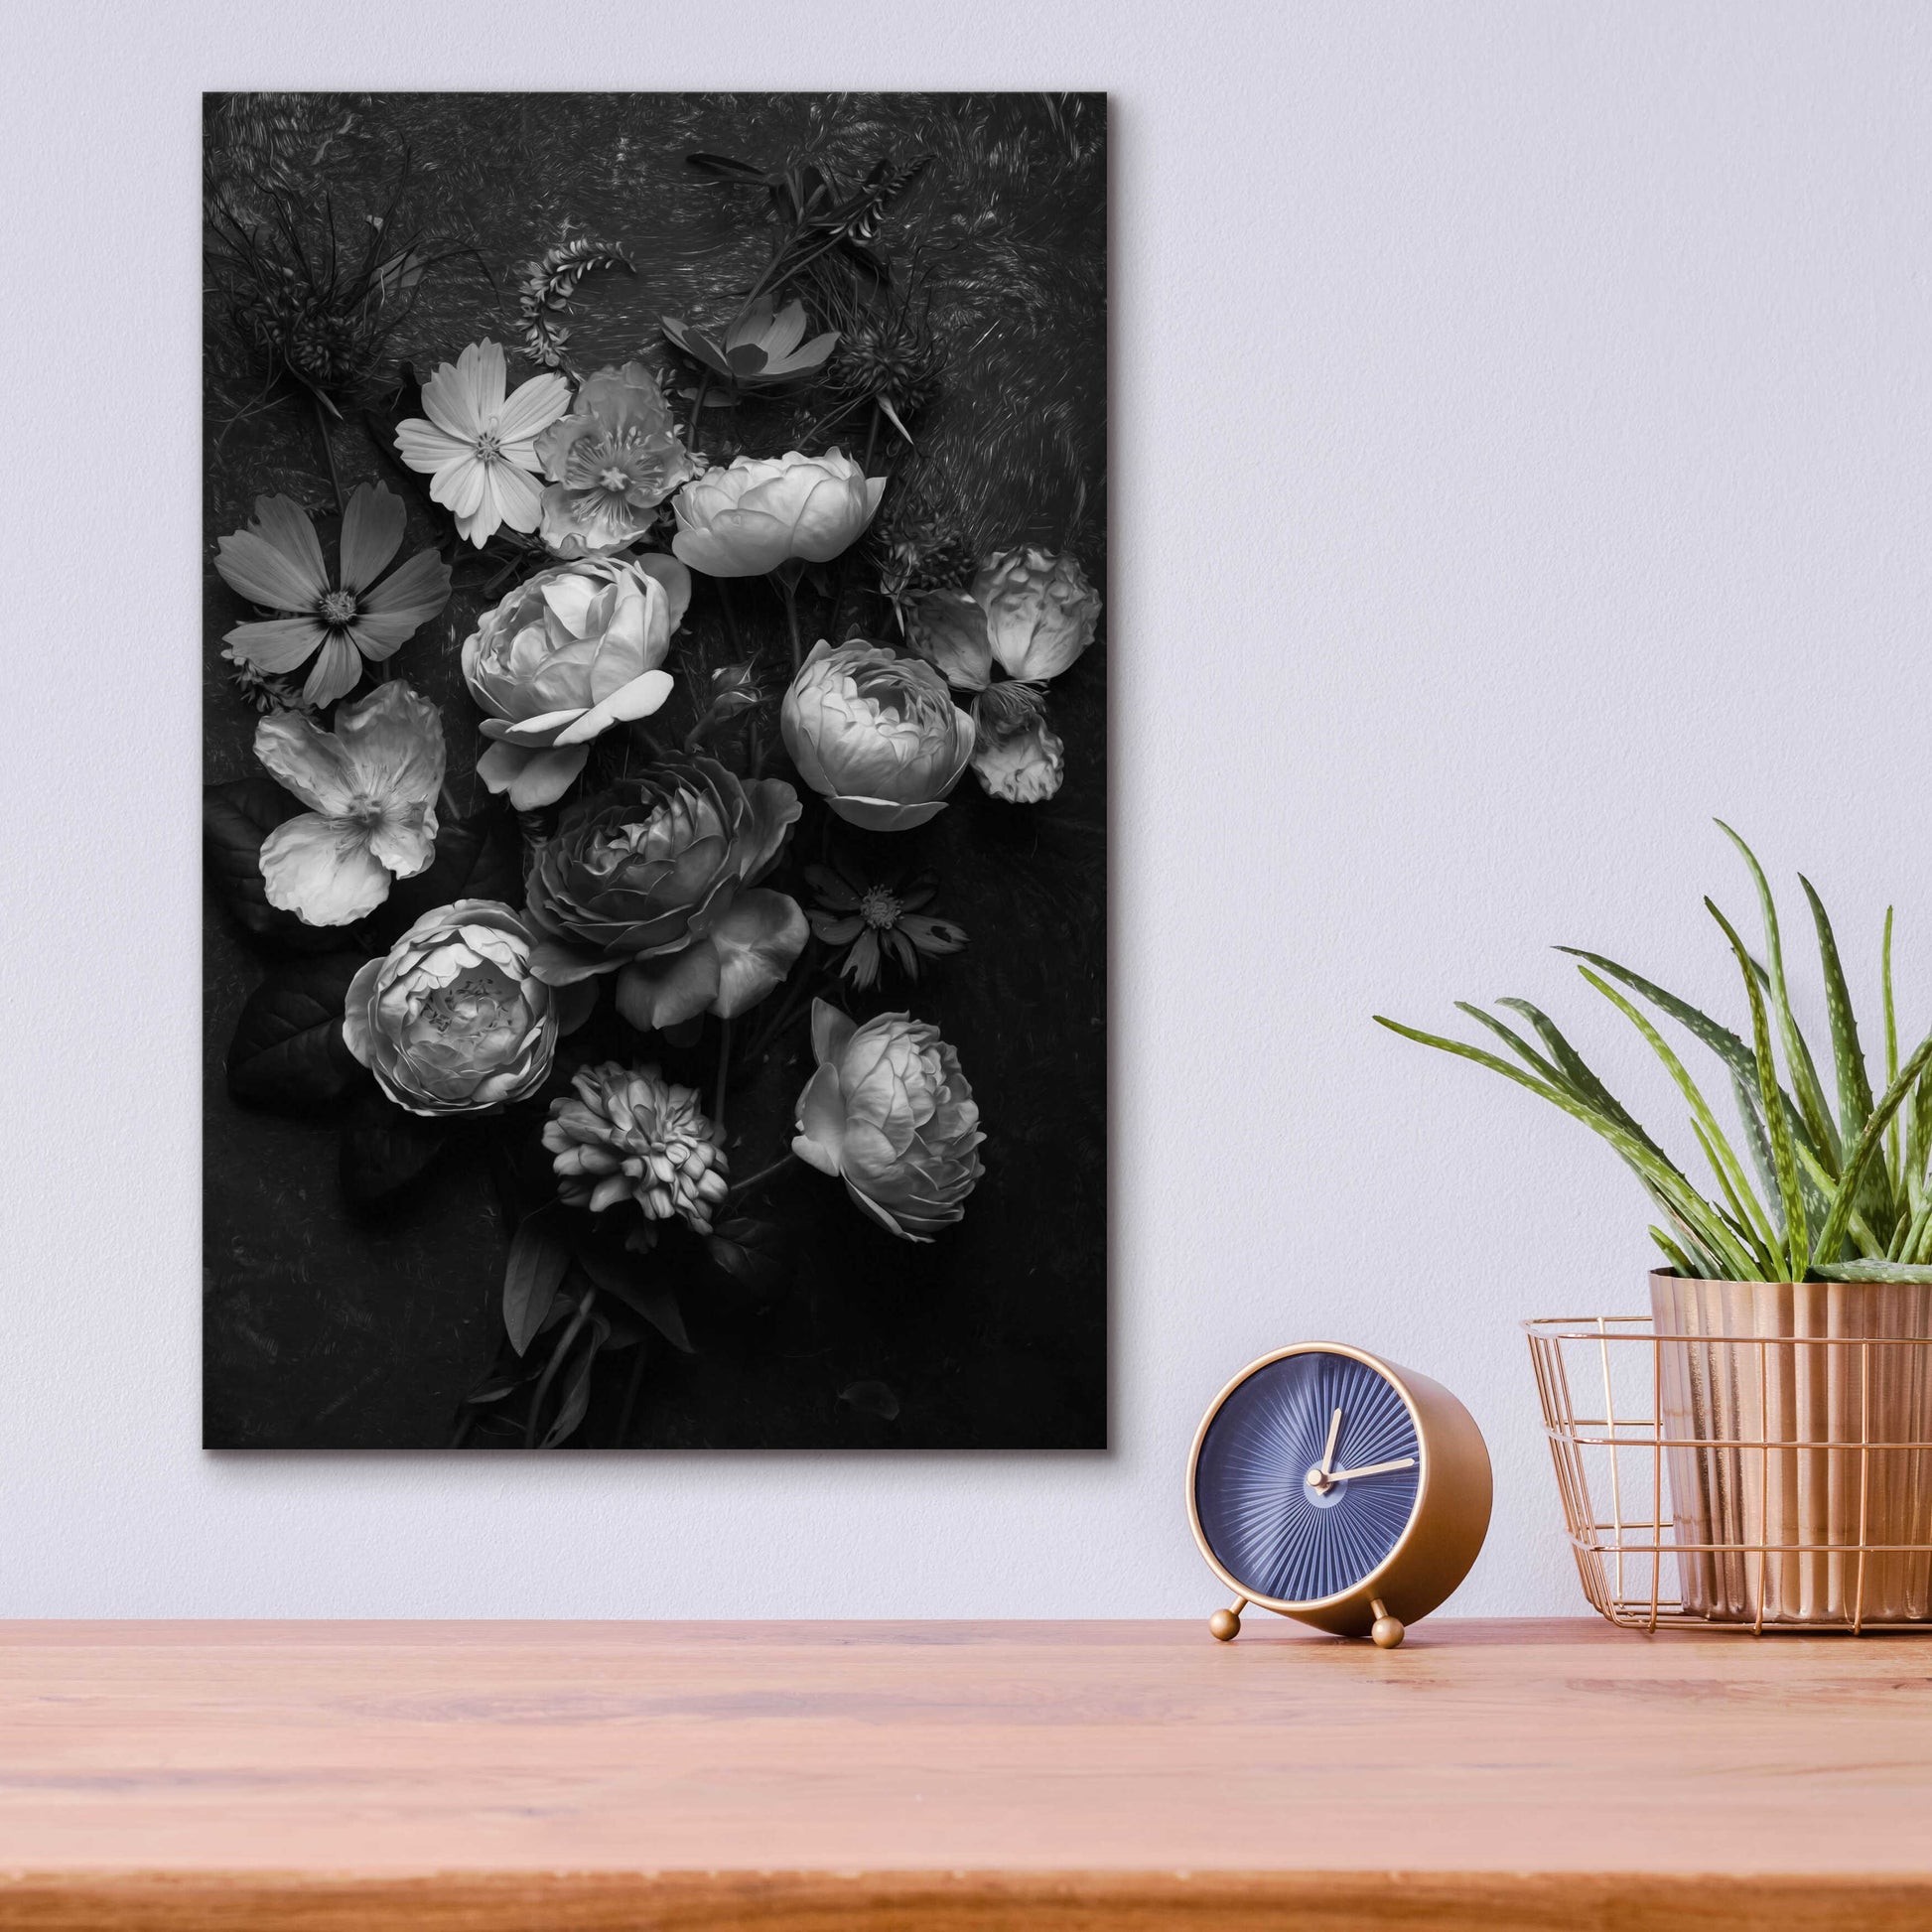 Epic Art 'A Monochrome Pocket Full of Posies' by Leah McLean, Acrylic Glass Wall Art,12x16